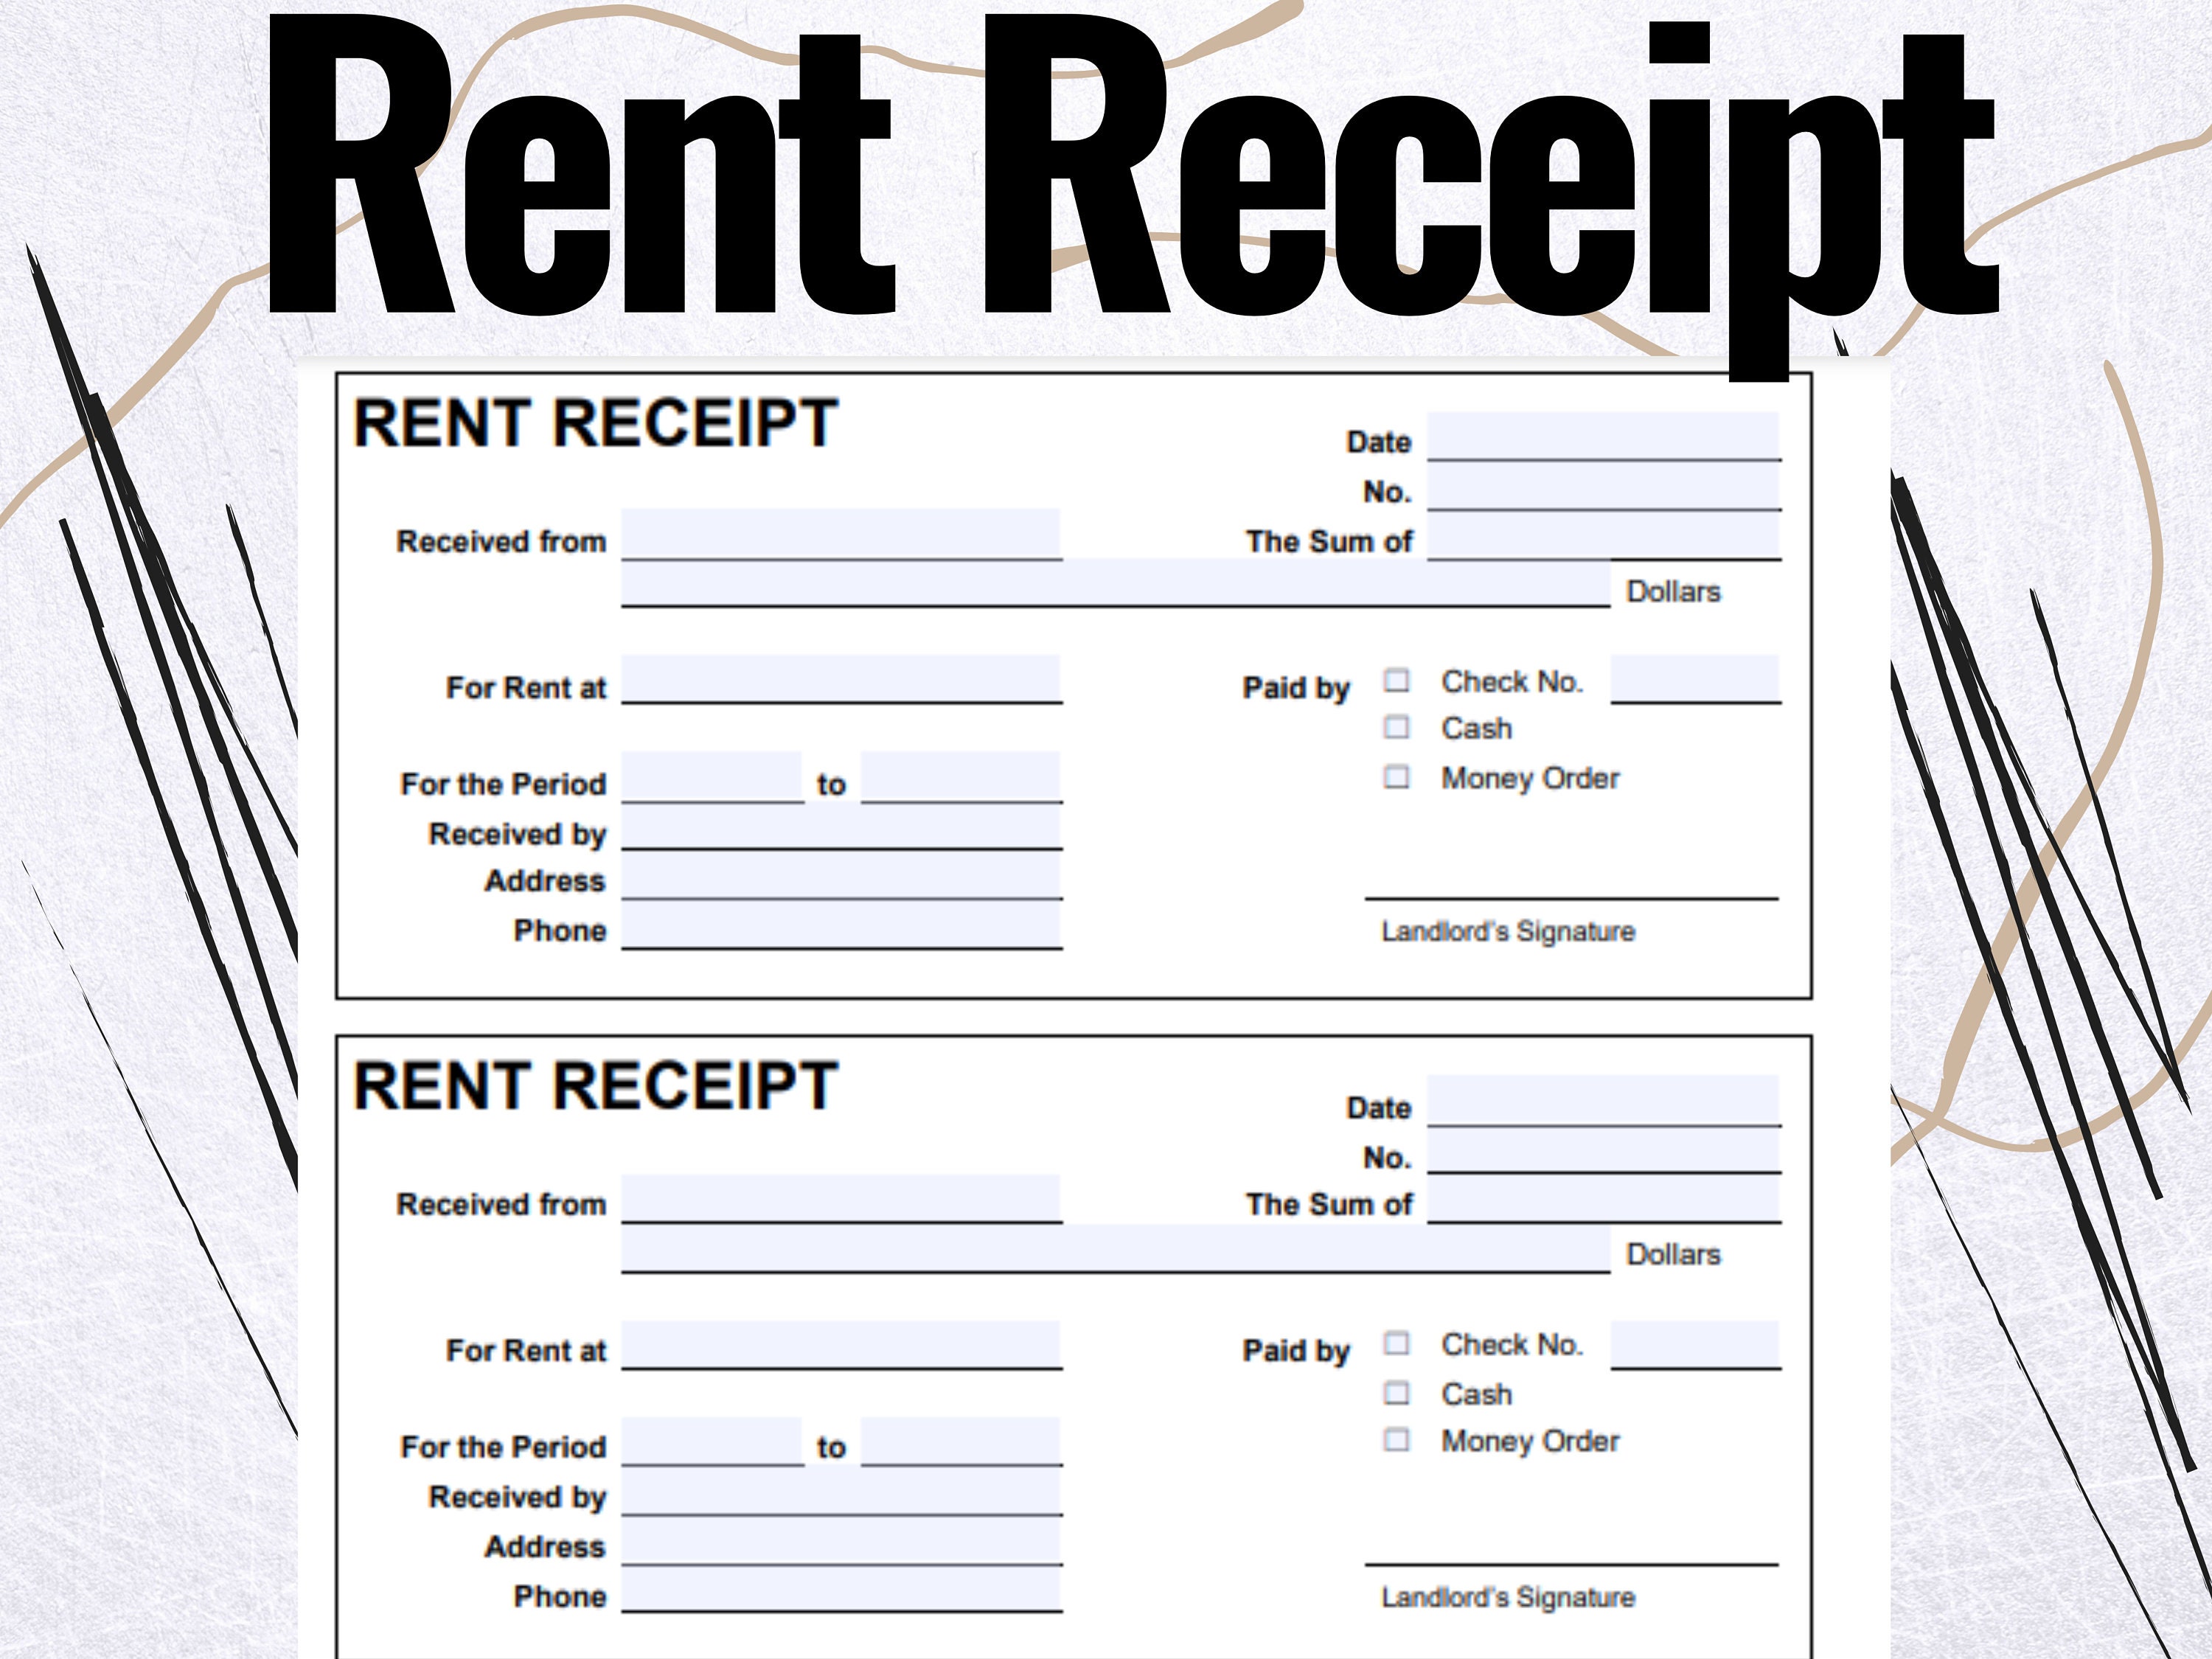 rent-receipt-rent-receipt-forms-rent-receipt-template-download-now-etsy